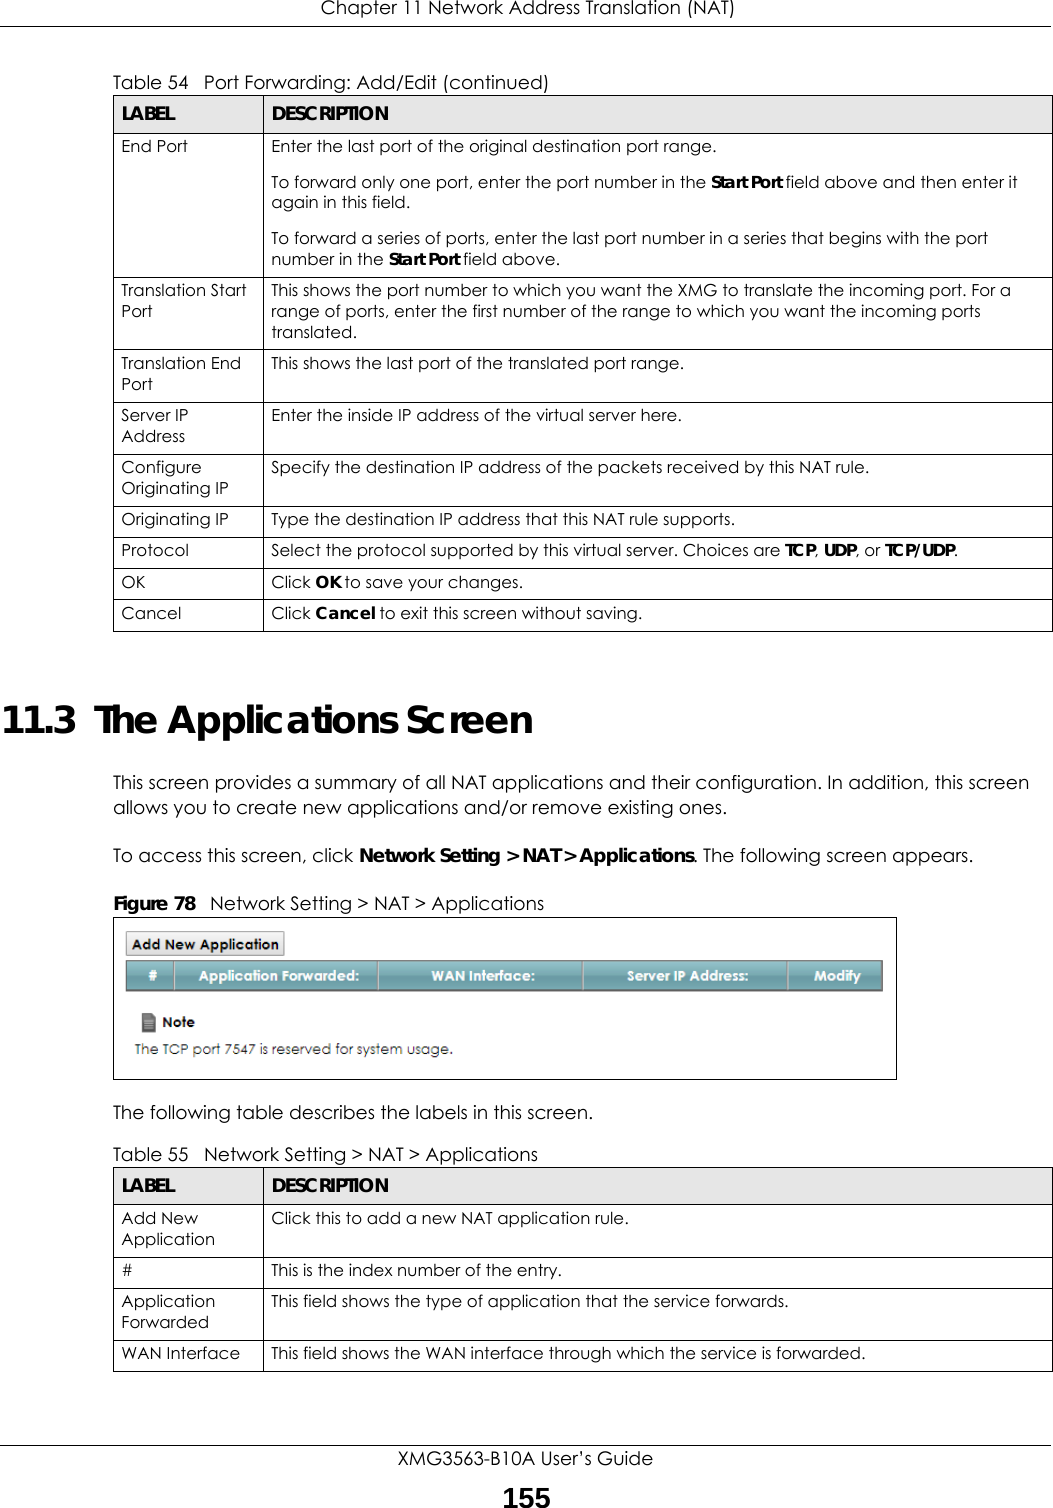  Chapter 11 Network Address Translation (NAT)XMG3563-B10A User’s Guide15511.3  The Applications ScreenThis screen provides a summary of all NAT applications and their configuration. In addition, this screen allows you to create new applications and/or remove existing ones.To access this screen, click Network Setting &gt; NAT &gt; Applications. The following screen appears.Figure 78   Network Setting &gt; NAT &gt; ApplicationsThe following table describes the labels in this screen. End Port  Enter the last port of the original destination port range. To forward only one port, enter the port number in the Start Port field above and then enter it again in this field. To forward a series of ports, enter the last port number in a series that begins with the port number in the Start Port field above.Translation Start PortThis shows the port number to which you want the XMG to translate the incoming port. For a range of ports, enter the first number of the range to which you want the incoming ports translated.Translation End Port This shows the last port of the translated port range.Server IP AddressEnter the inside IP address of the virtual server here.Configure Originating IPSpecify the destination IP address of the packets received by this NAT rule.Originating IP Type the destination IP address that this NAT rule supports.Protocol Select the protocol supported by this virtual server. Choices are TCP, UDP, or TCP/UDP.OK Click OK to save your changes.Cancel Click Cancel to exit this screen without saving.Table 54   Port Forwarding: Add/Edit (continued)LABEL DESCRIPTIONTable 55   Network Setting &gt; NAT &gt; ApplicationsLABEL DESCRIPTIONAdd New ApplicationClick this to add a new NAT application rule.#This is the index number of the entry.Application ForwardedThis field shows the type of application that the service forwards.WAN Interface This field shows the WAN interface through which the service is forwarded.